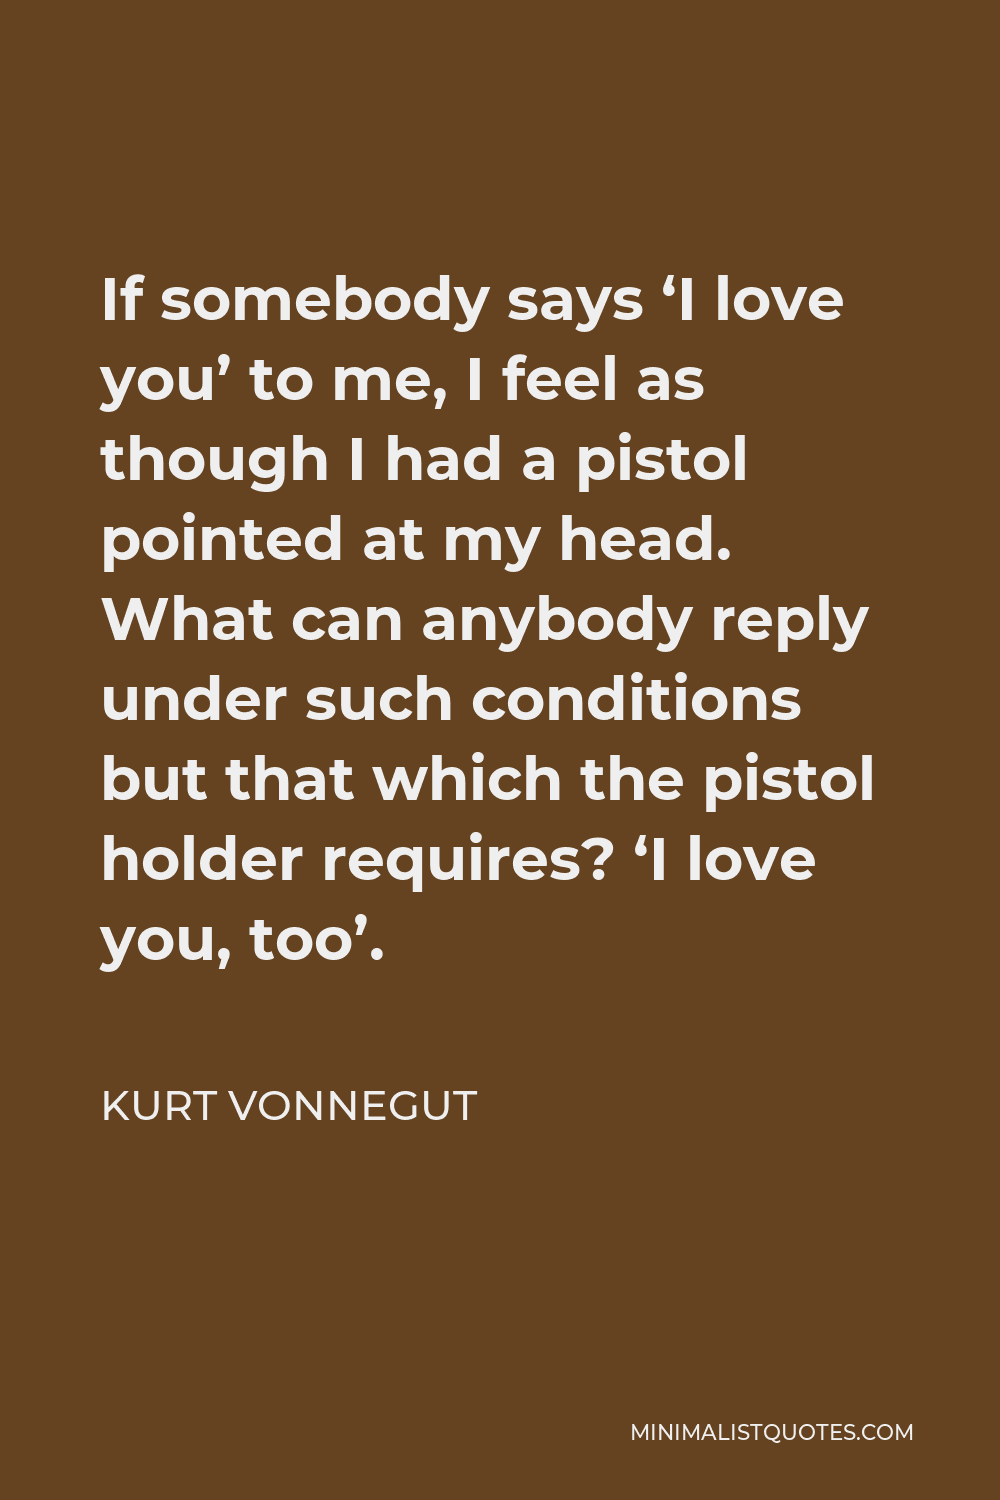 Kurt Vonnegut Quote - If somebody says ‘I love you’ to me, I feel as though I had a pistol pointed at my head. What can anybody reply under such conditions but that which the pistol holder requires? ‘I love you, too’.